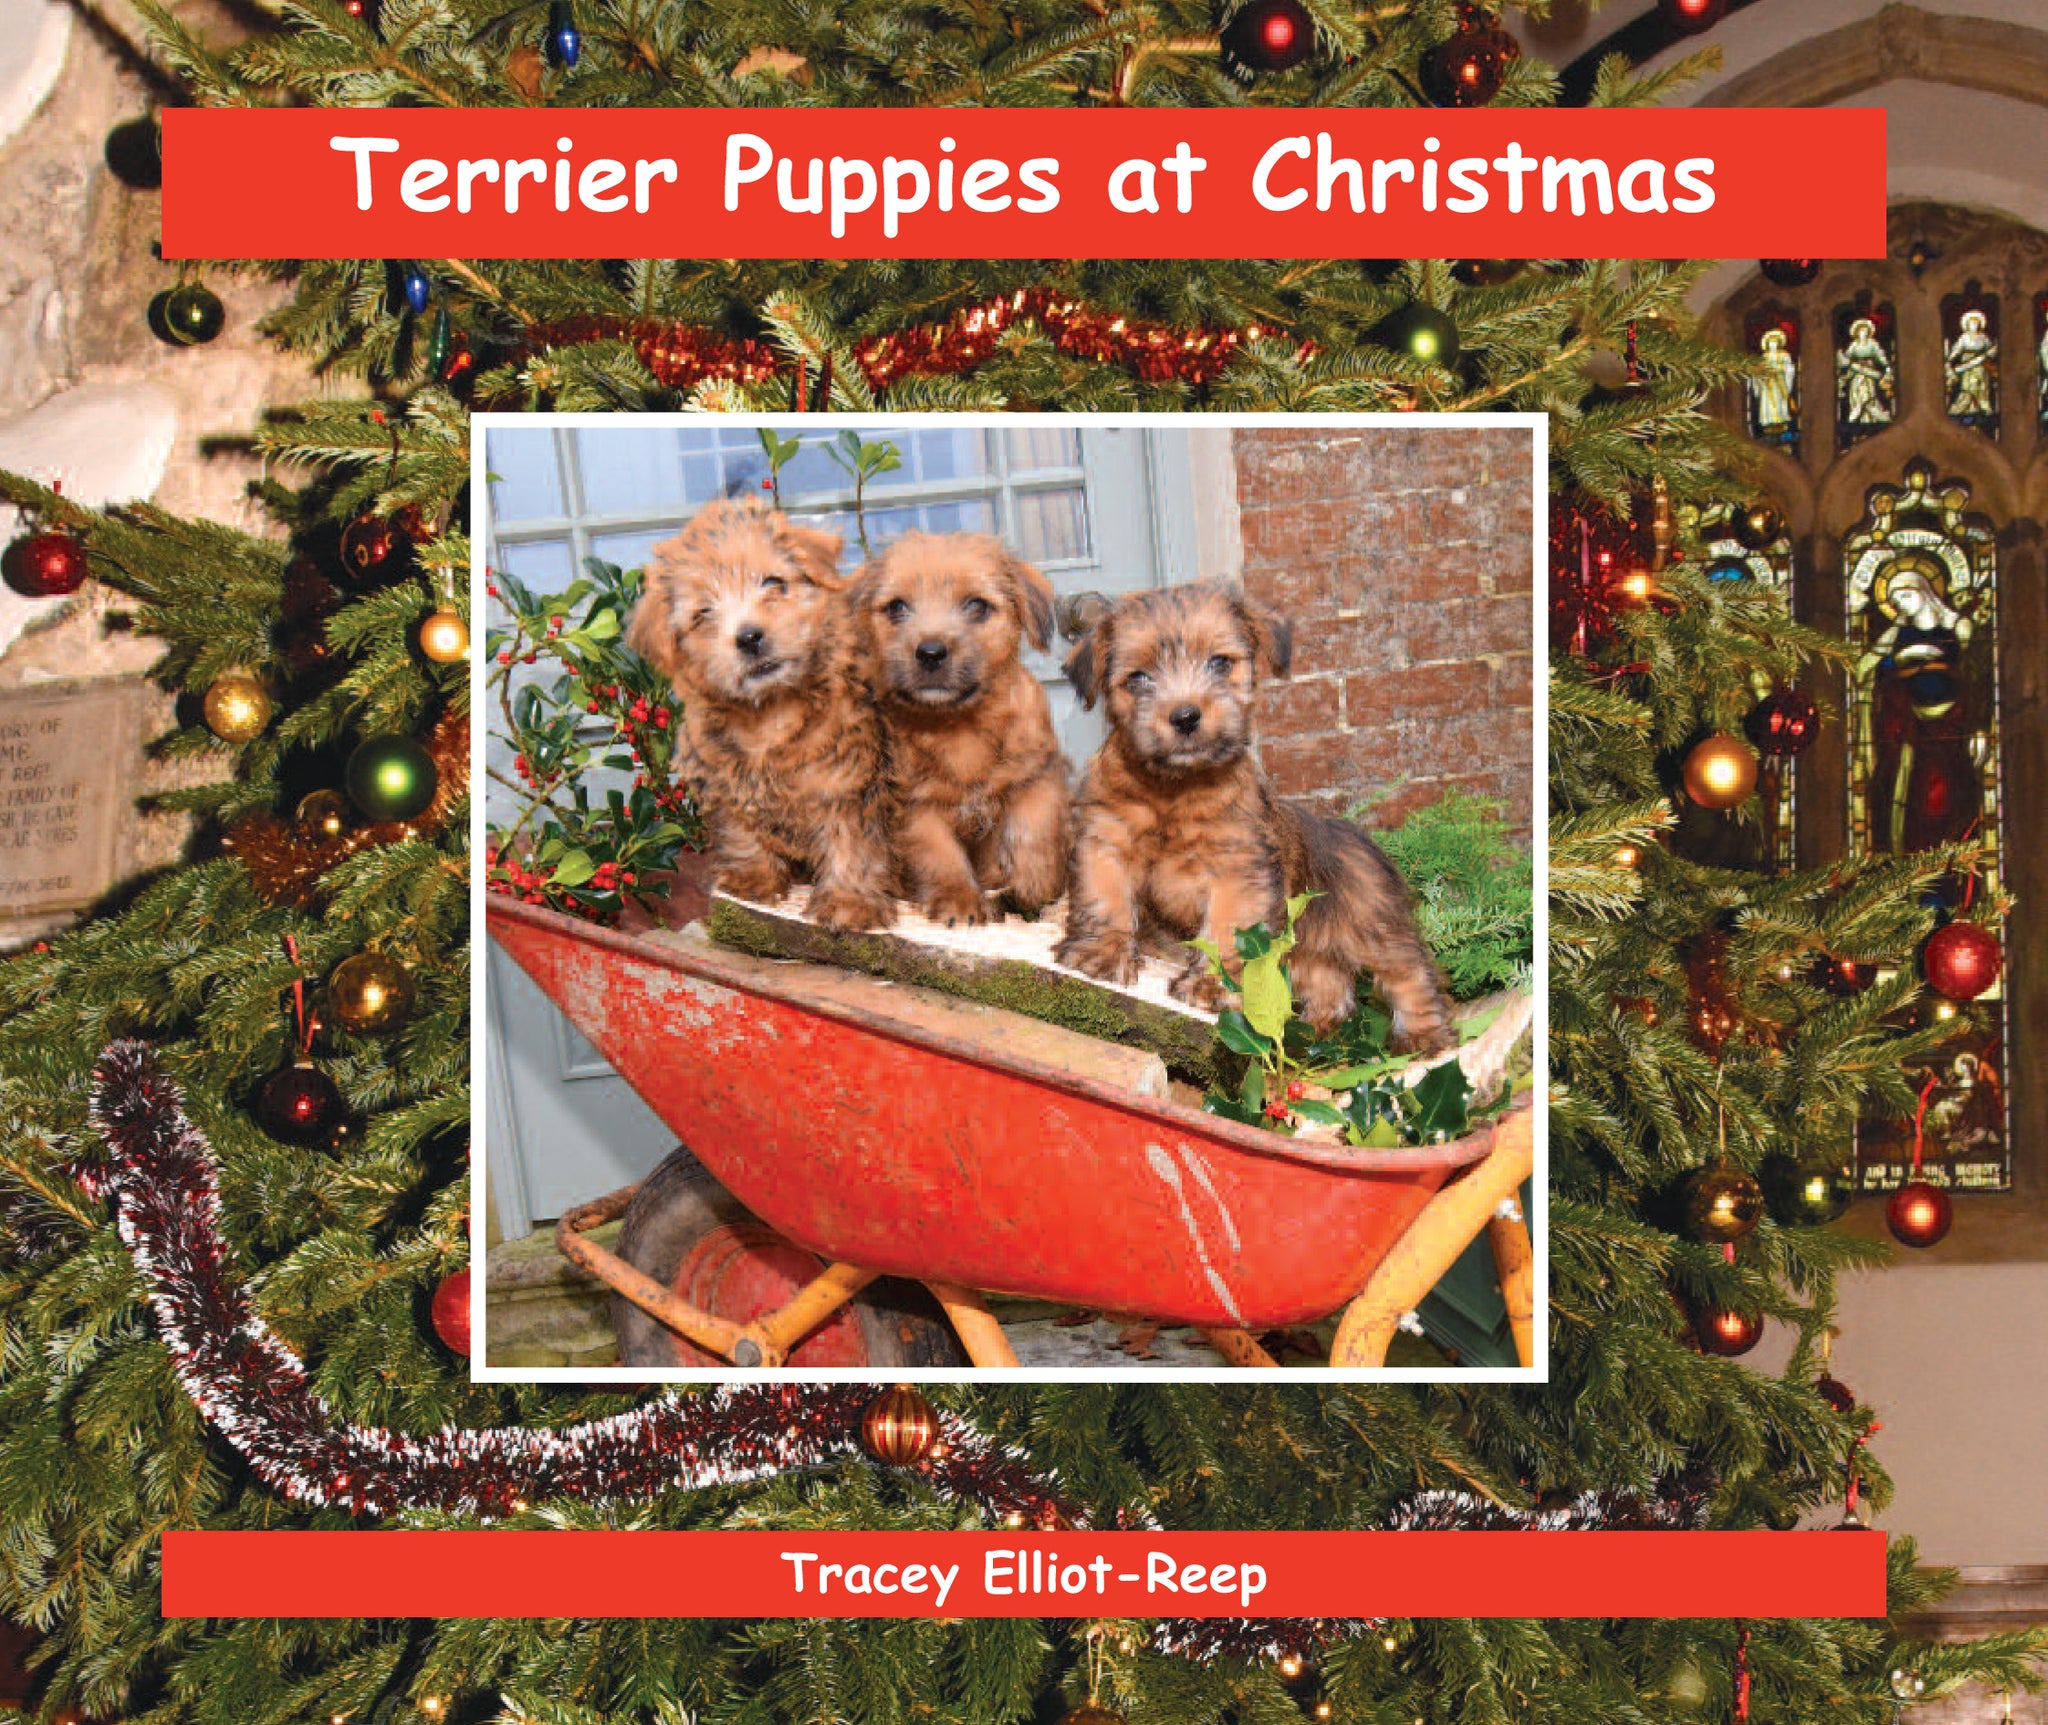 B029 - Terrier Puppies at Christmas - Flexi-cover Book